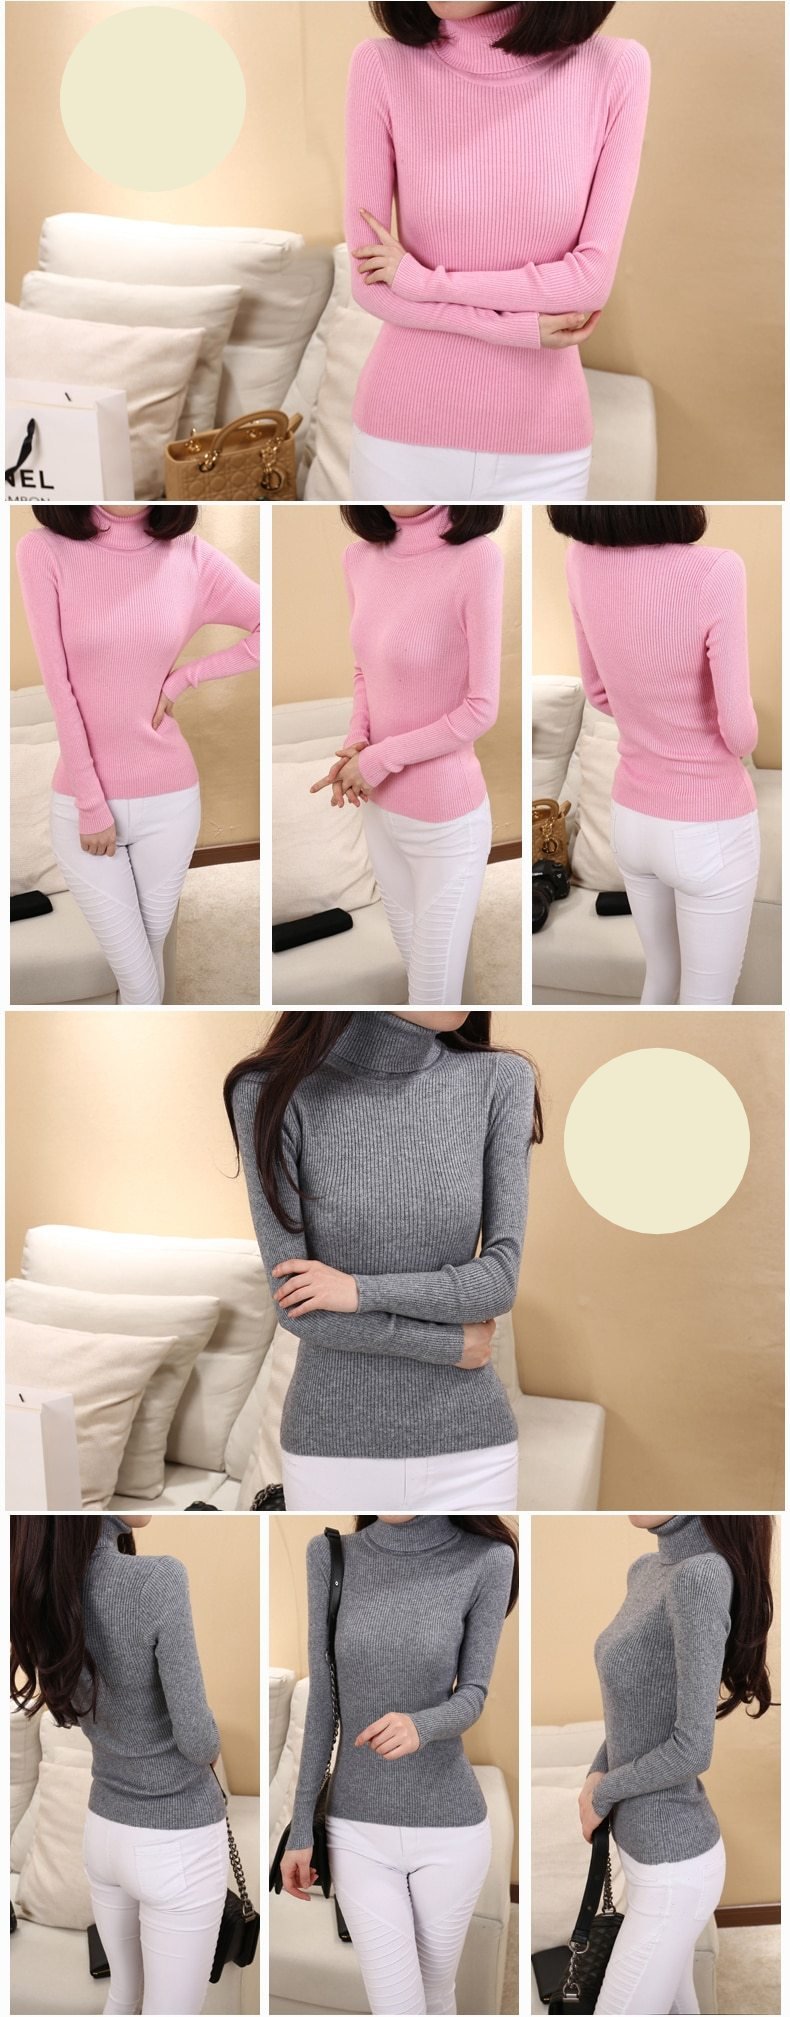 Lori Lundy Cashmere Sprout Sweater